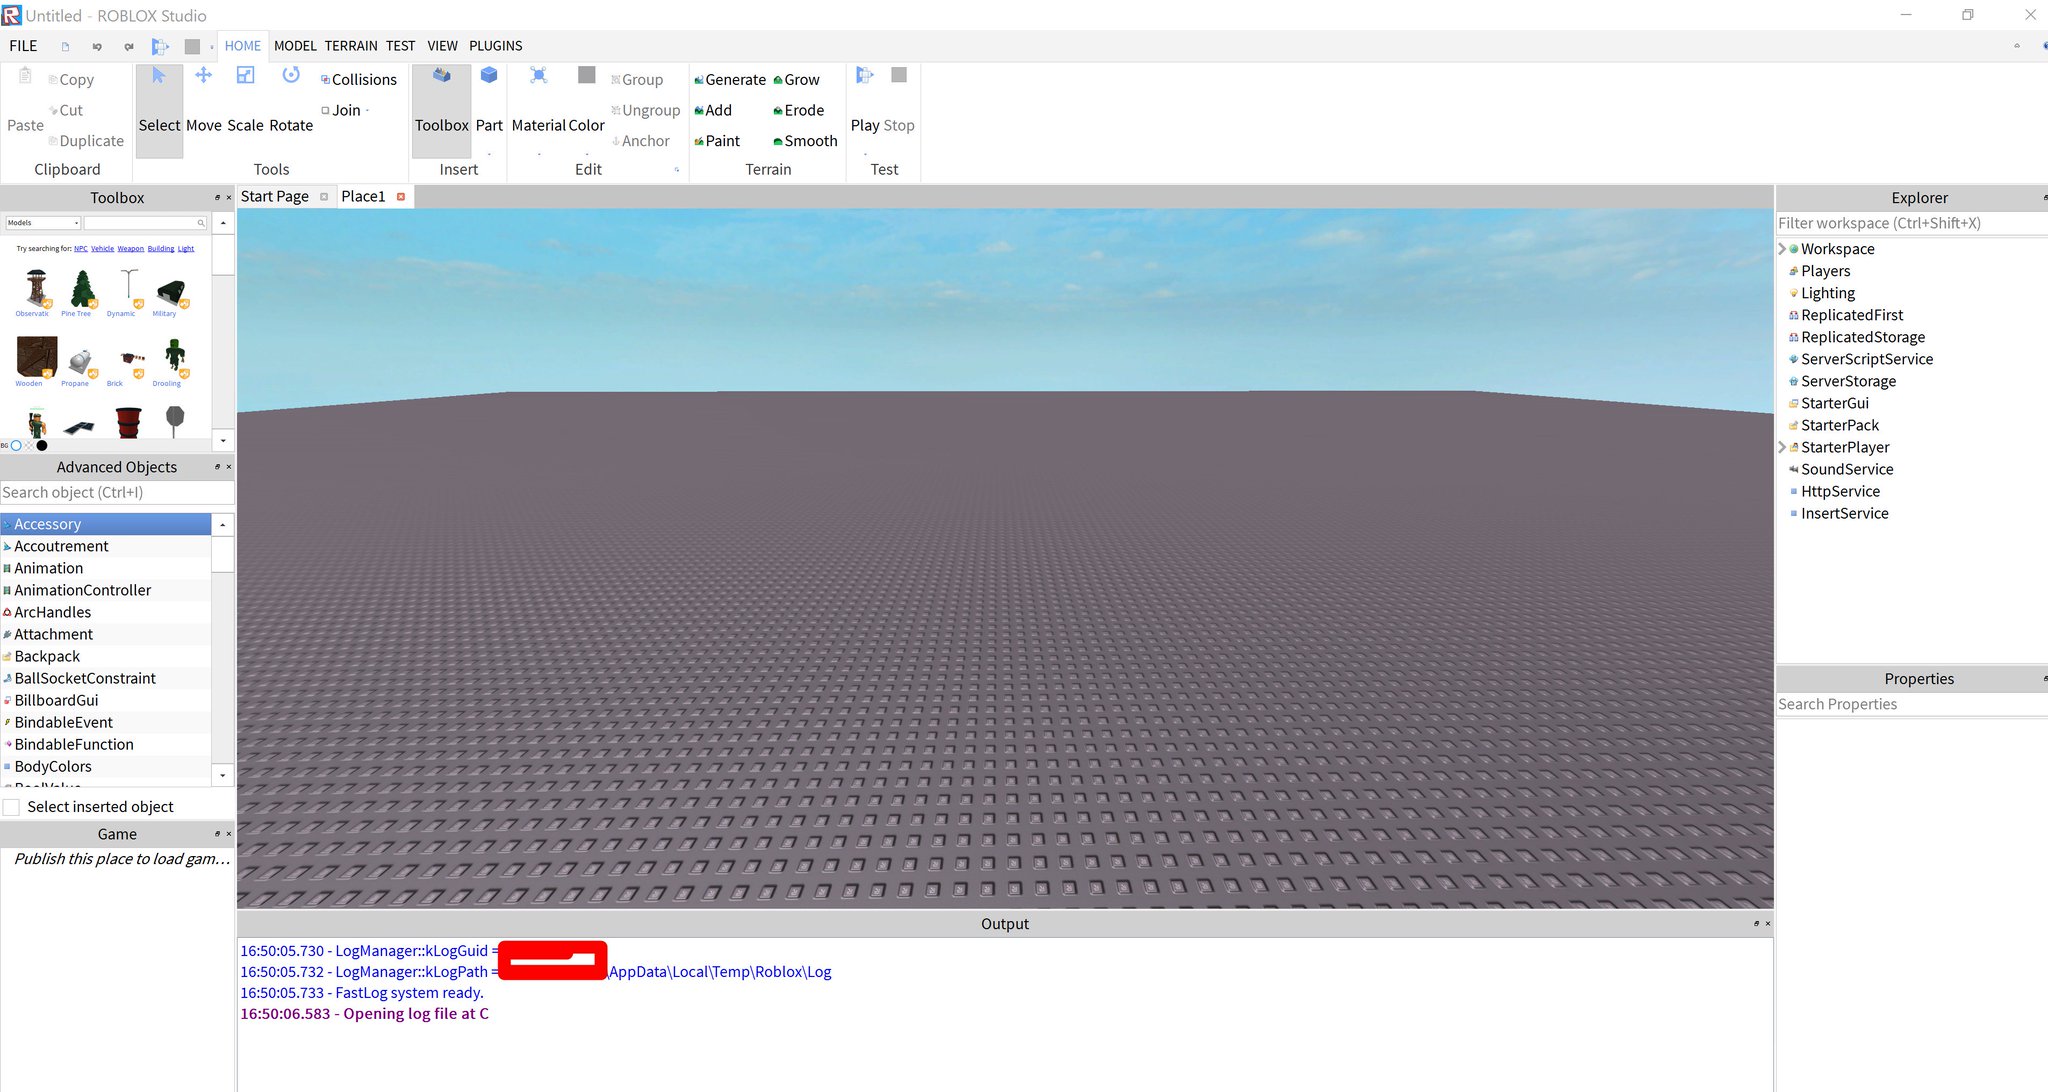 Tigercaptain On Twitter My 4k Res Laptop Screen Is Making The Buttons Tiny In Roblox Studio Anyone Know How To Fix This - roblox billboard gui scaling